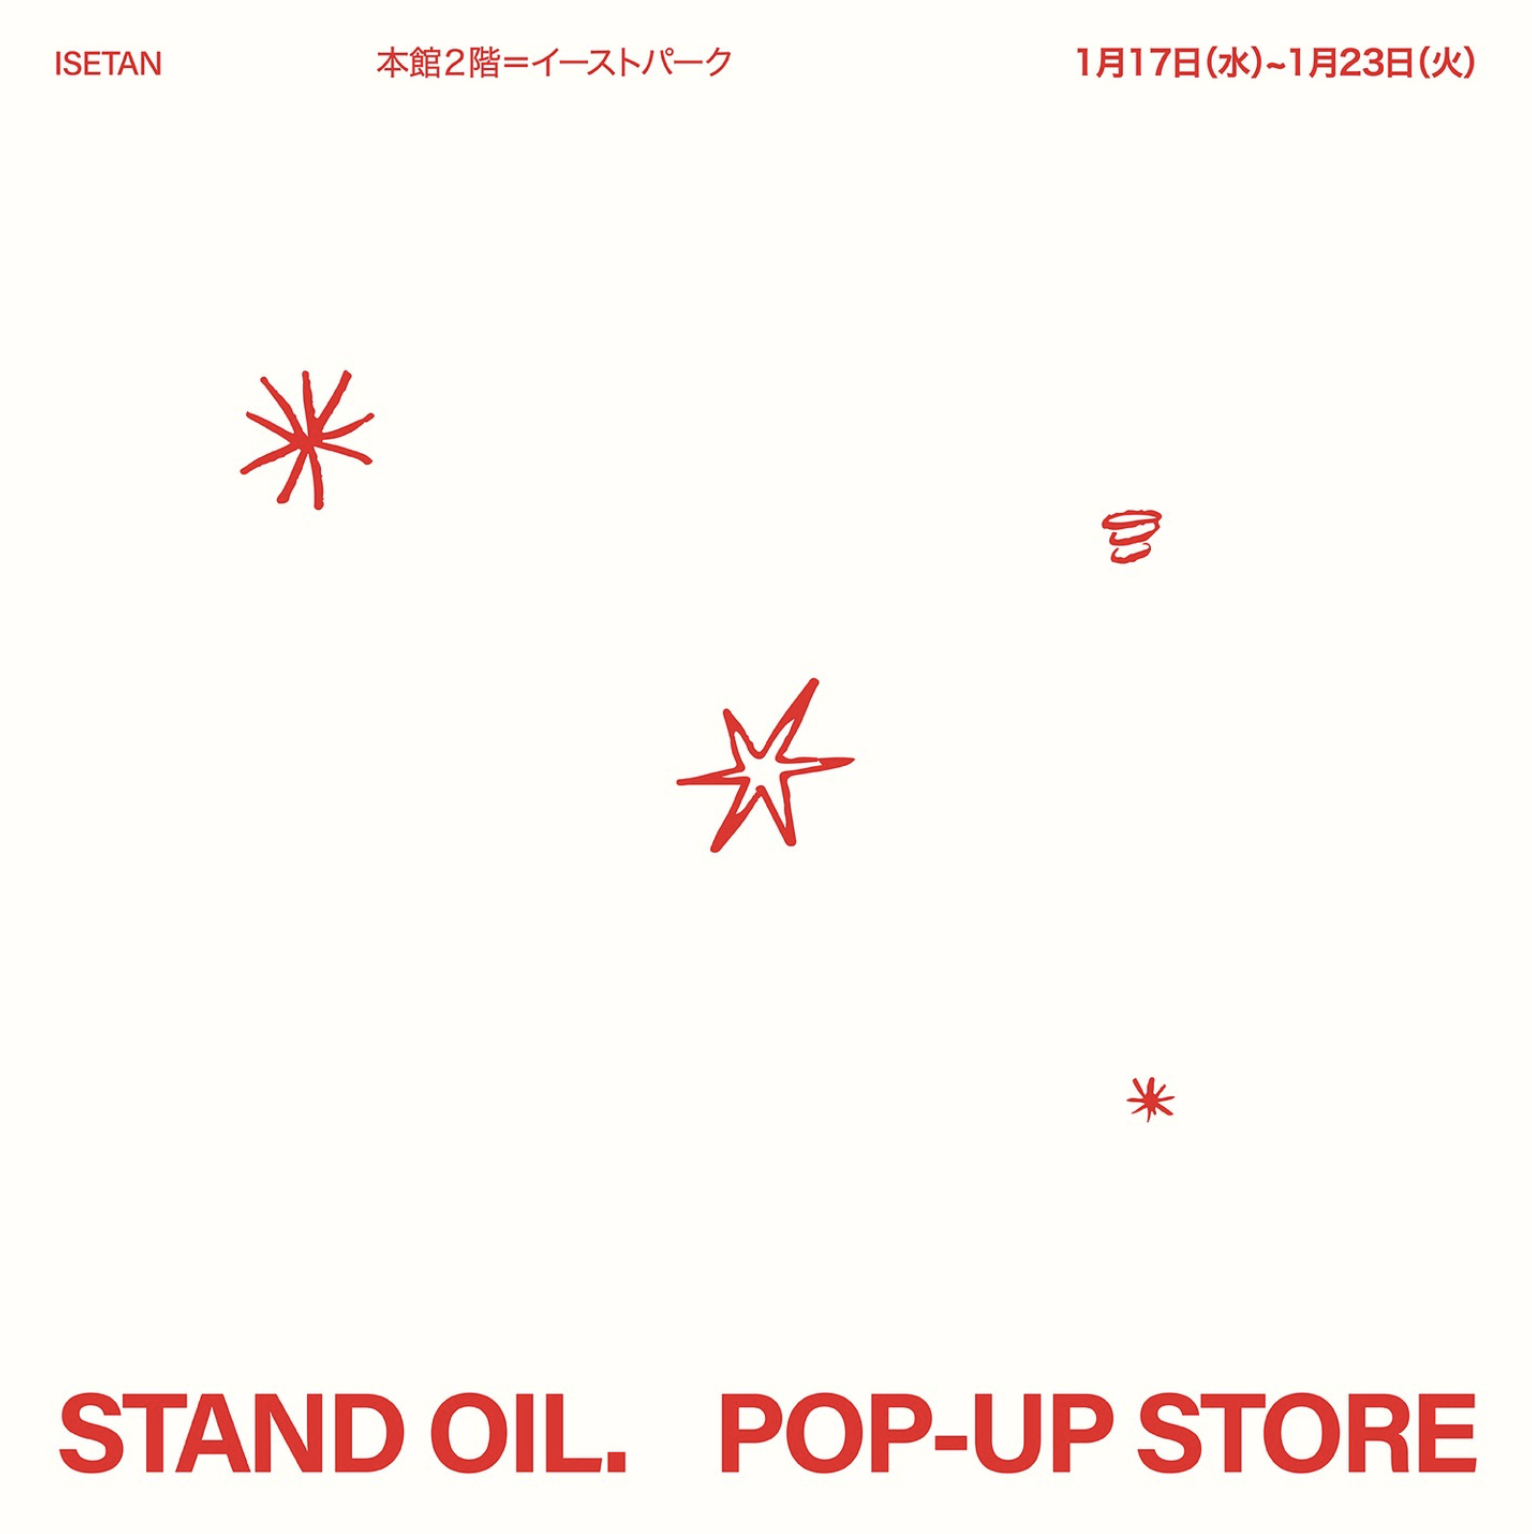 STAND OIL POPUP